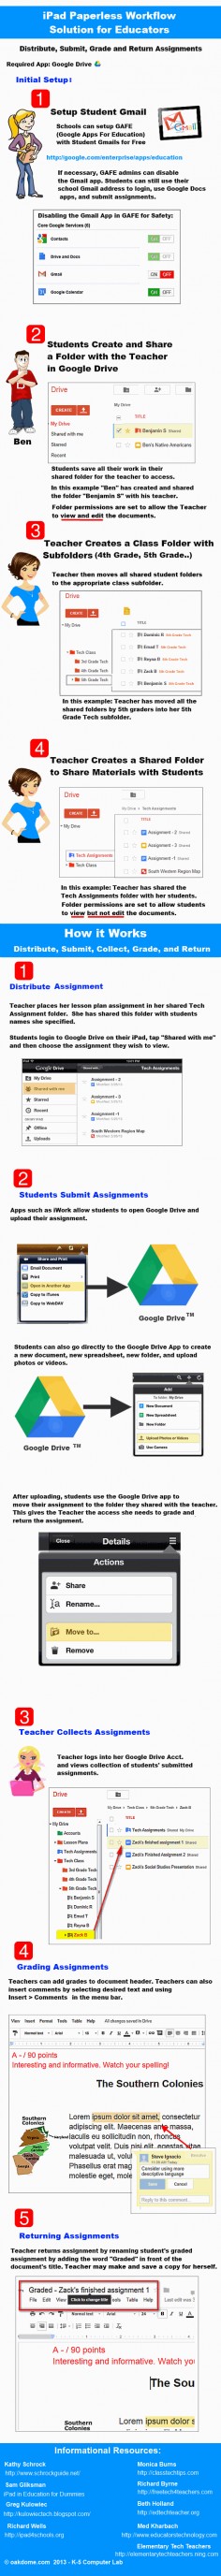 Go paperless and stay organized with this helpful step-by-step iPad workflow infographic for teachers.